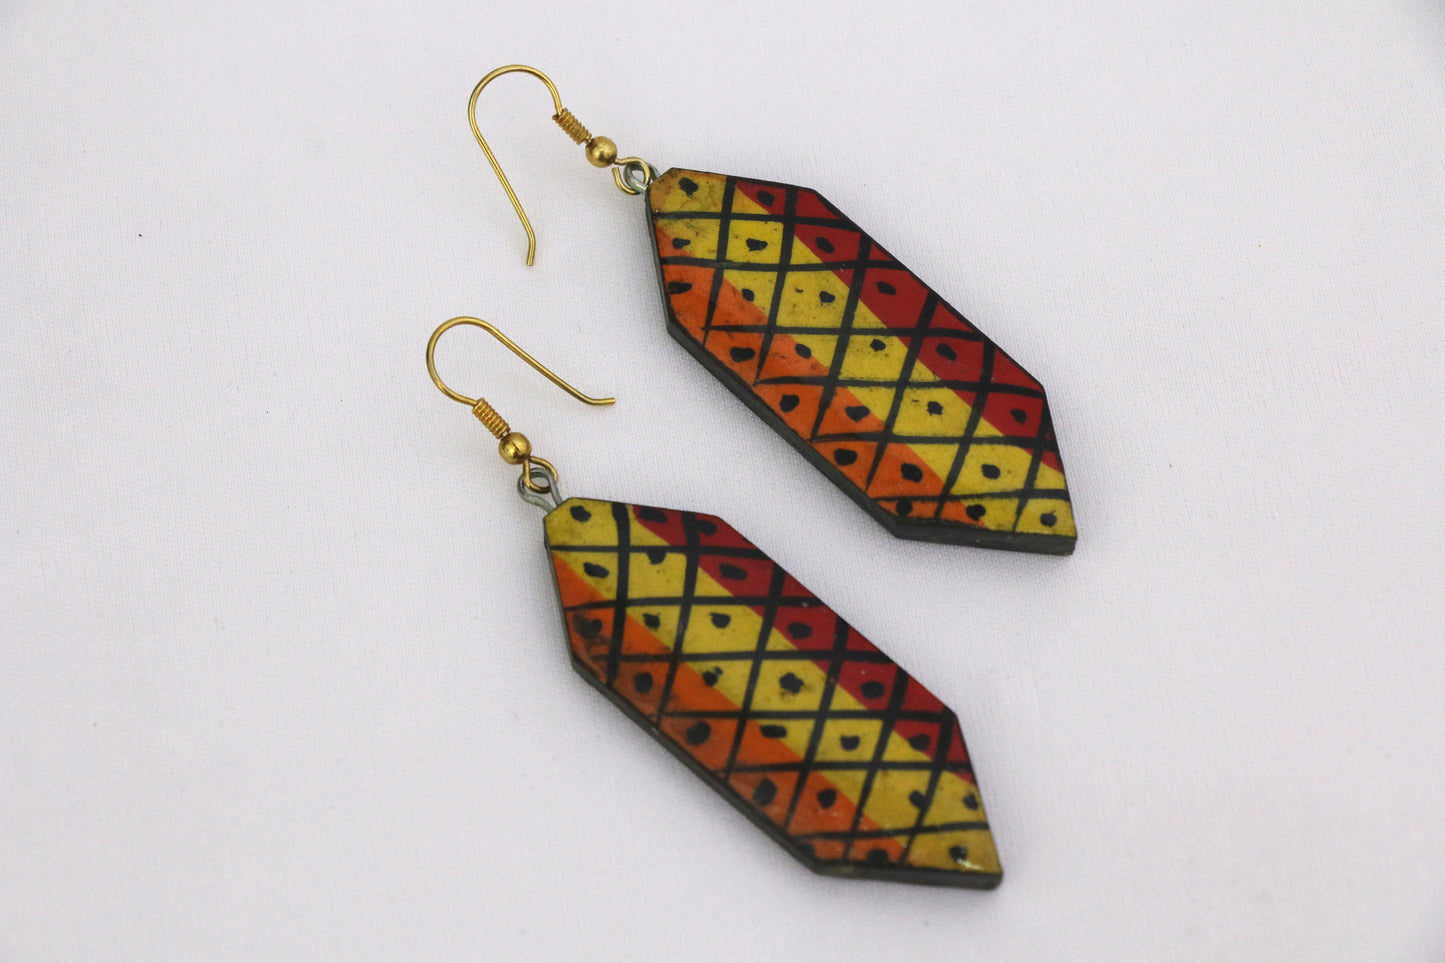 Channapatna wood craft –Locally crafted – Wooden Earrings – Alpine/Falu Red and Russet colored earring - For Kids / Adults -  P000158